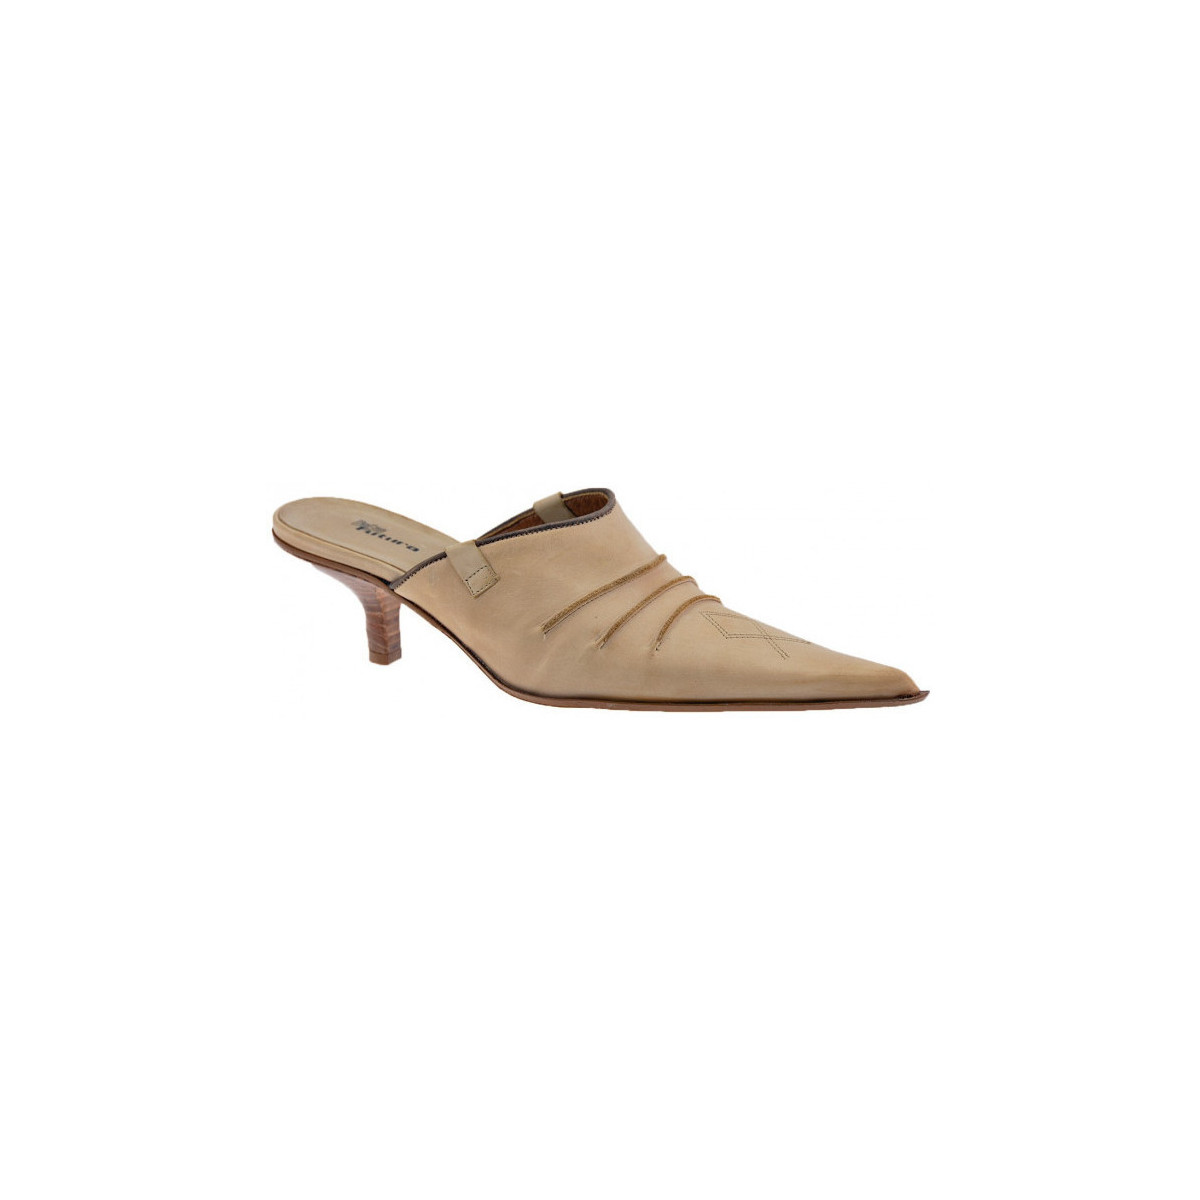 Chaussures Femme Baskets mode No End Texano Tacco50 Beige